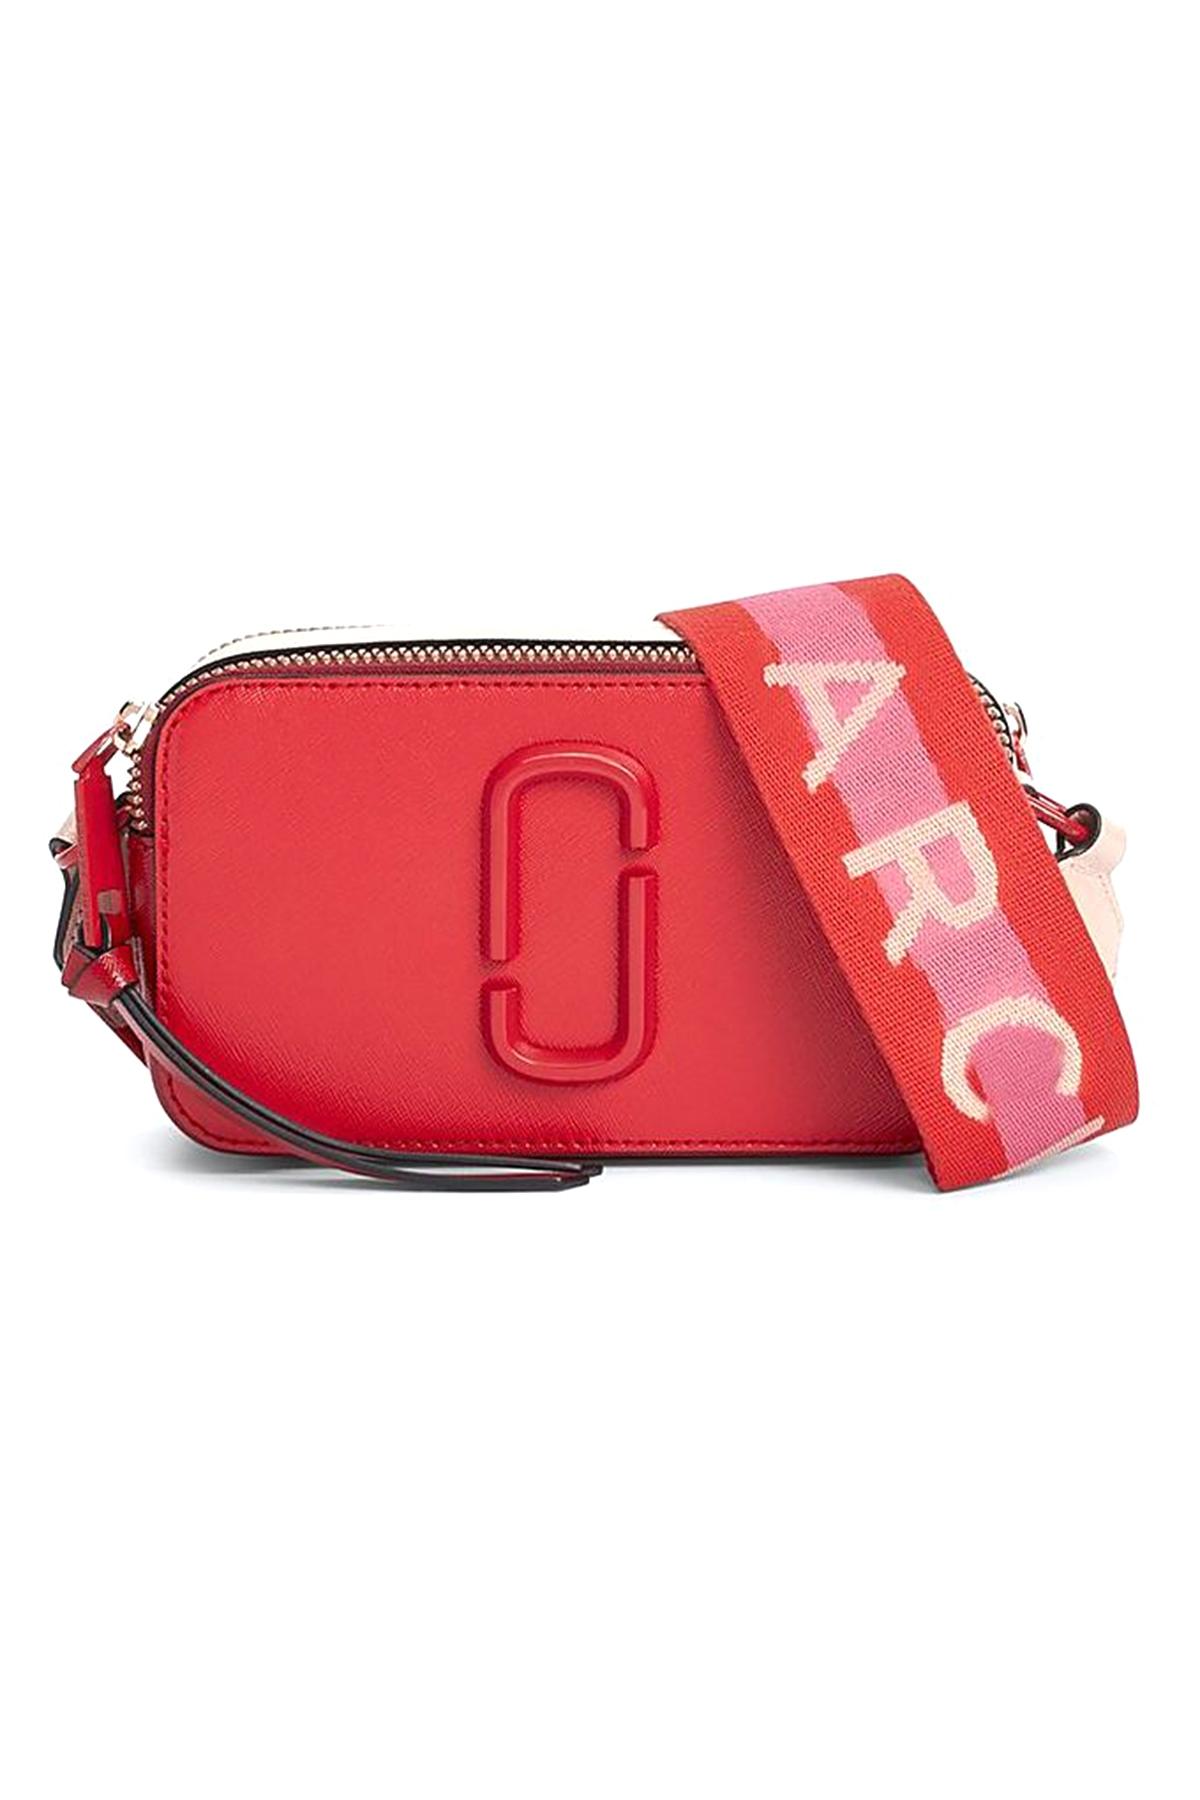 Marc Jacobs Leather Snapshot Dtm Bag In Poppy Red Multi - Lyst